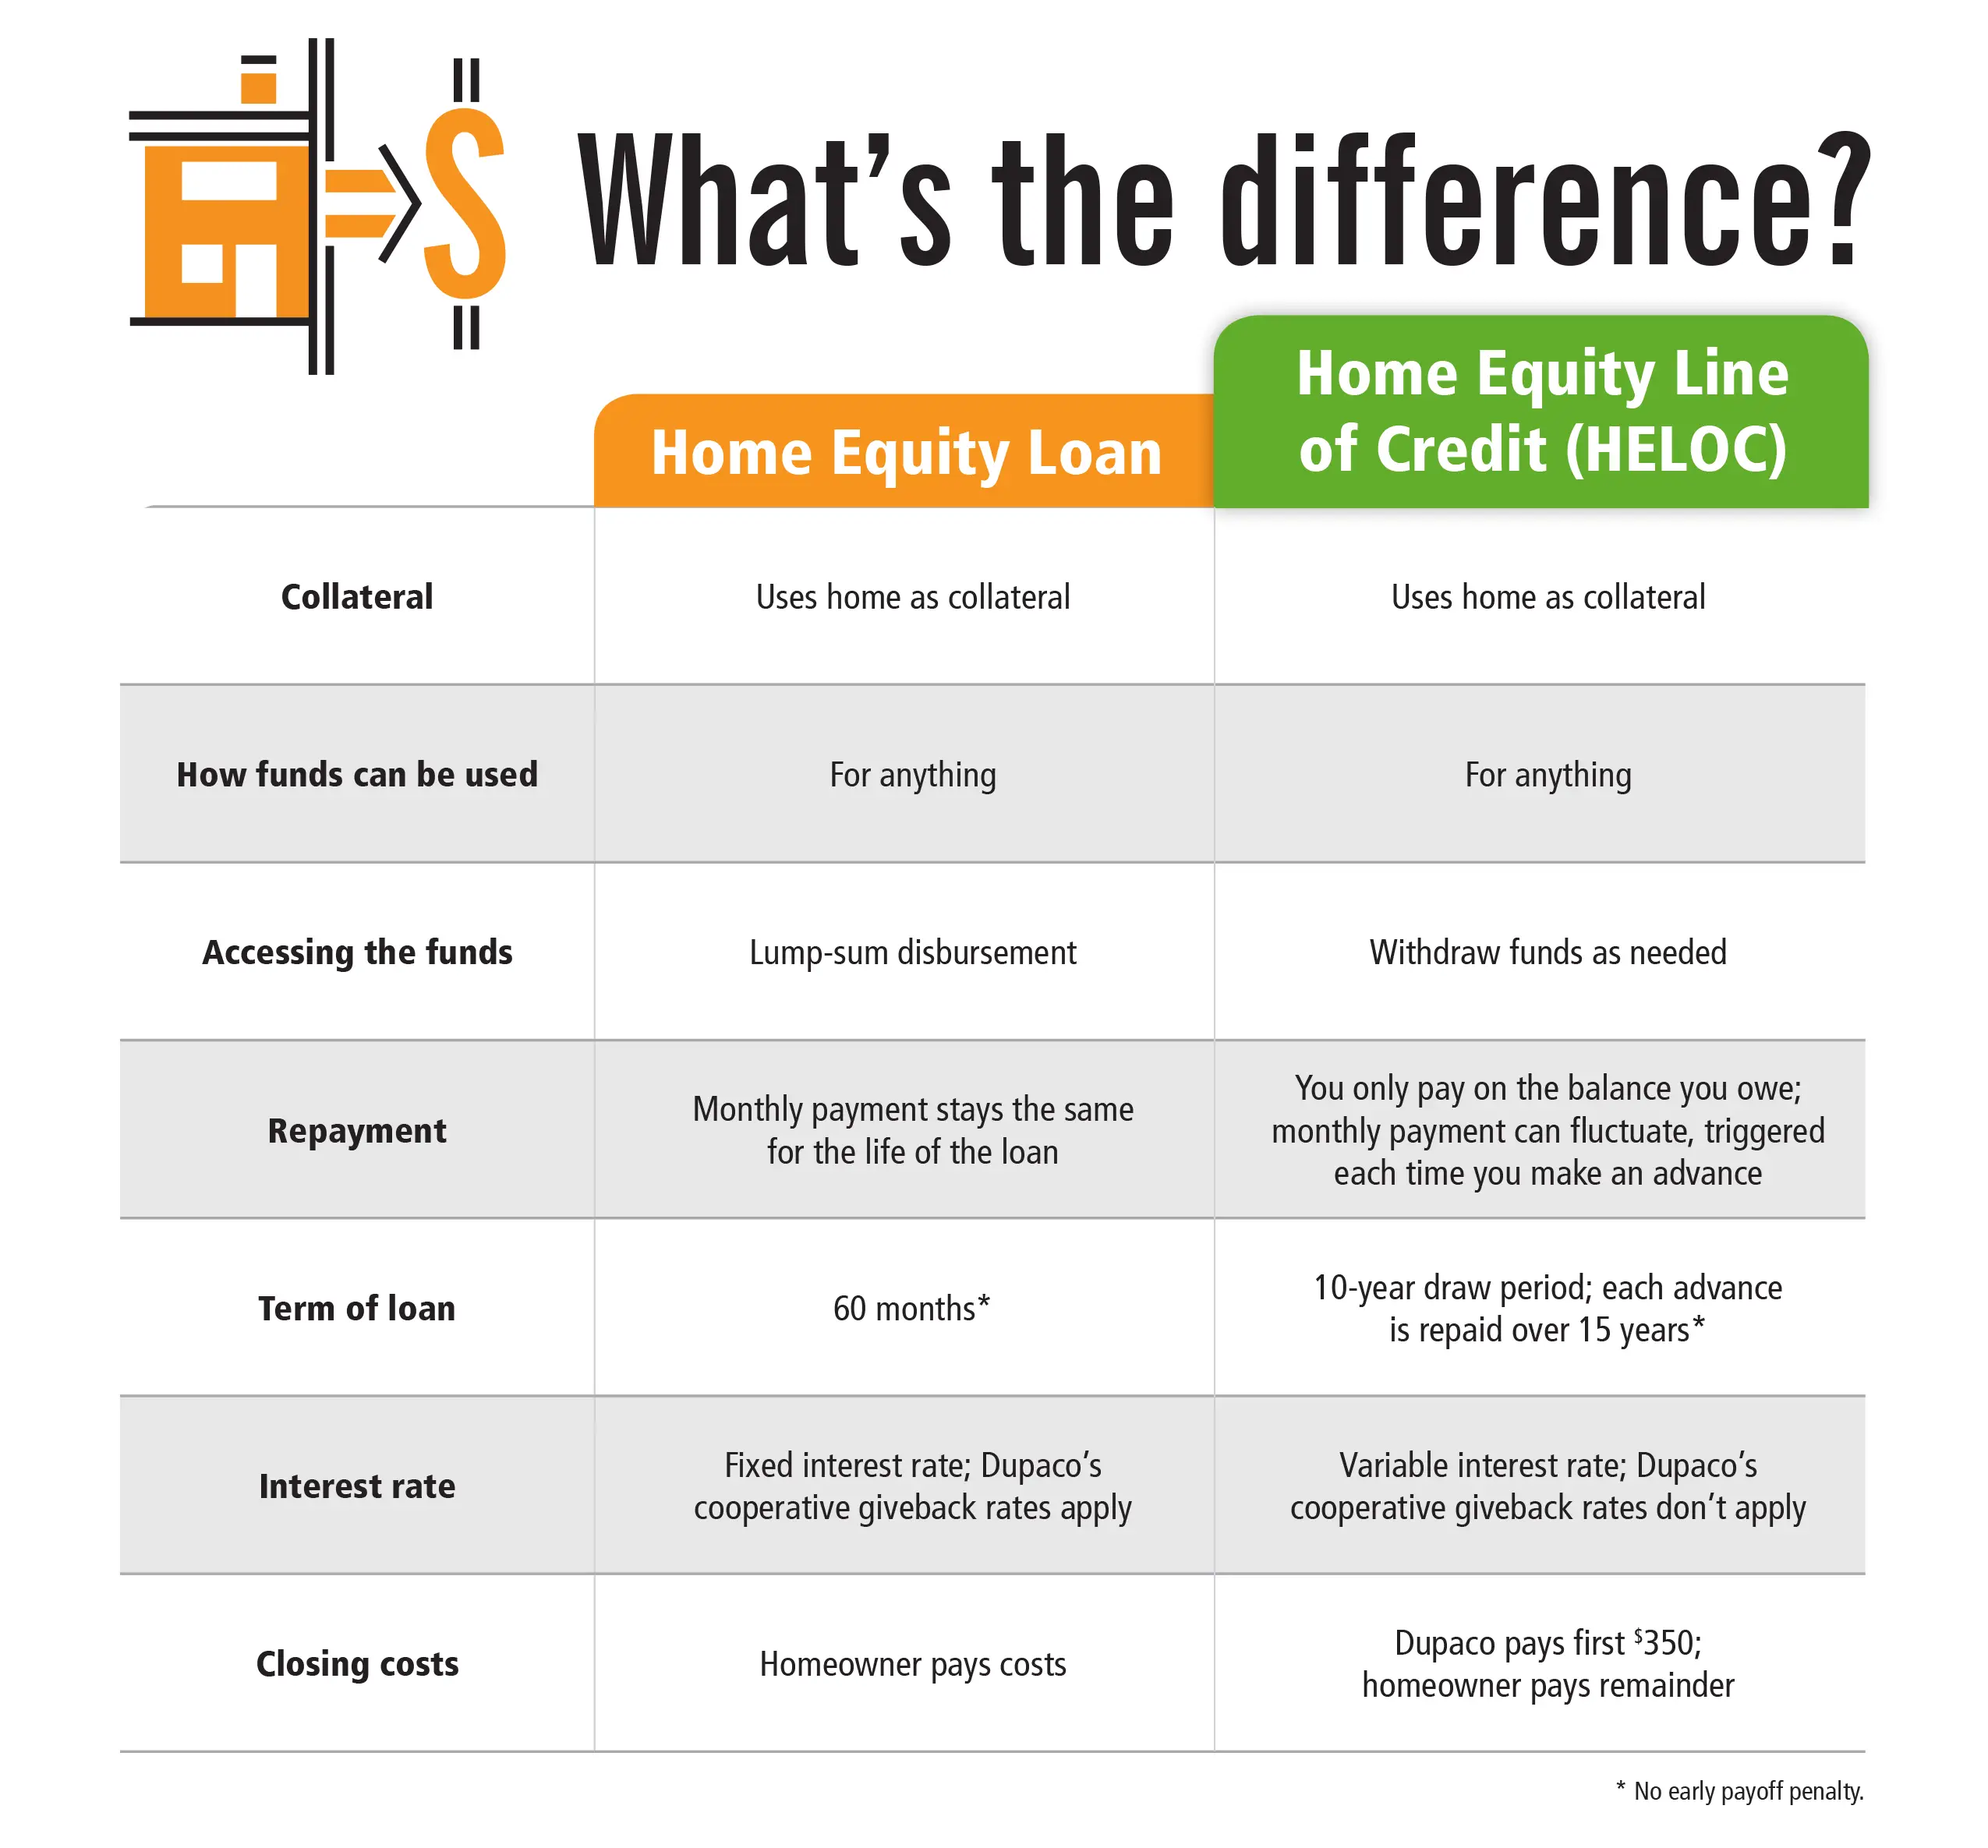 Home equity loan or line of credit: Which is right for you?